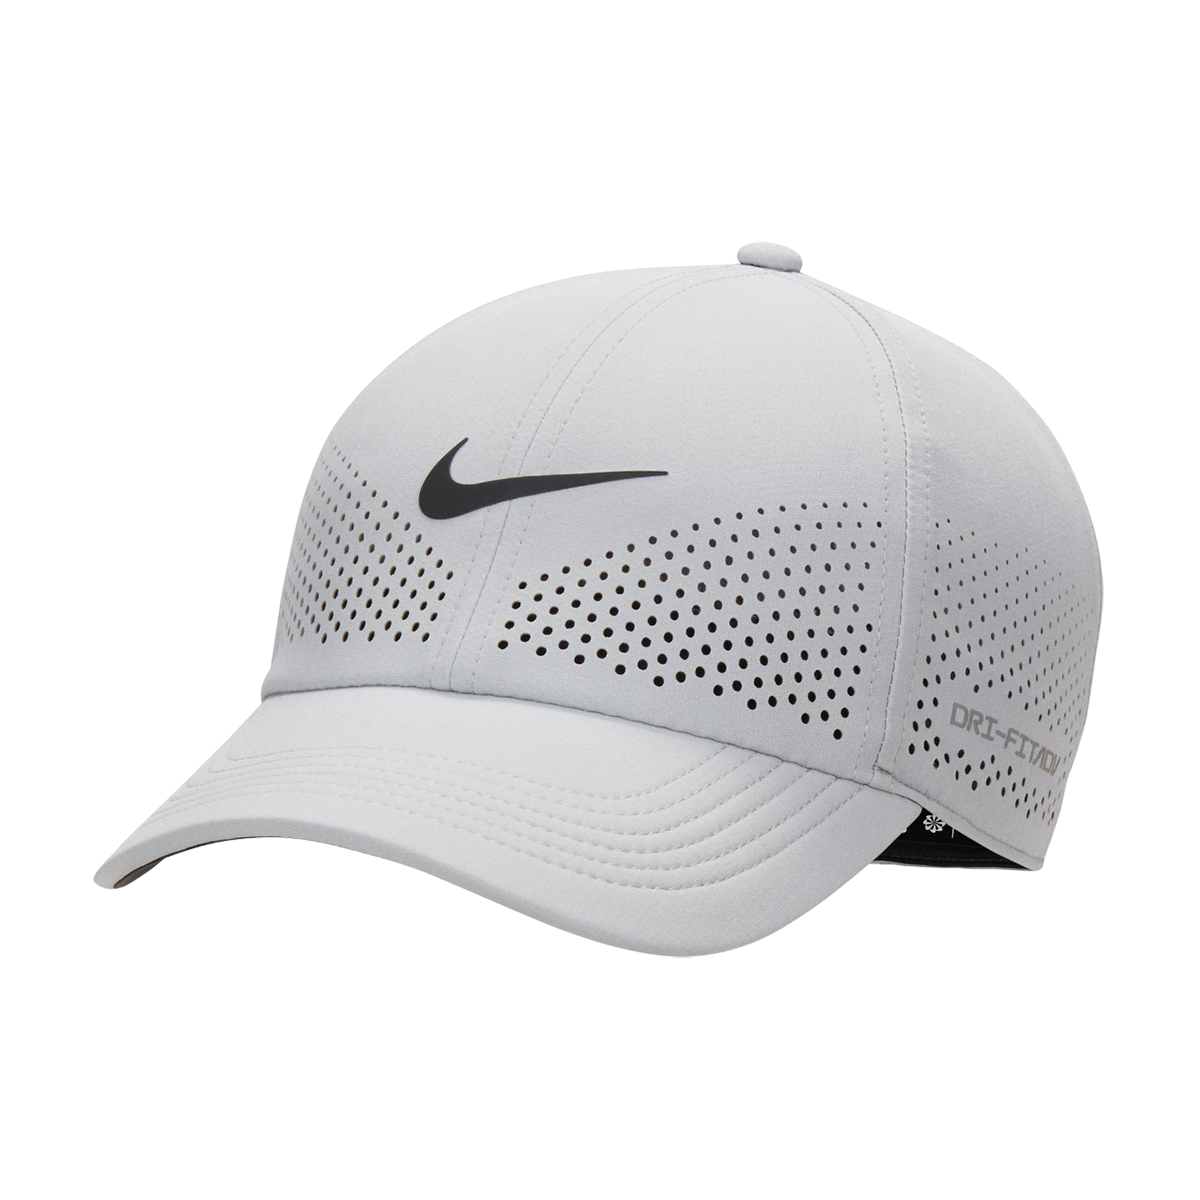 Nike CLUB UNSTRUCTURED JUST DO IT CAP Black